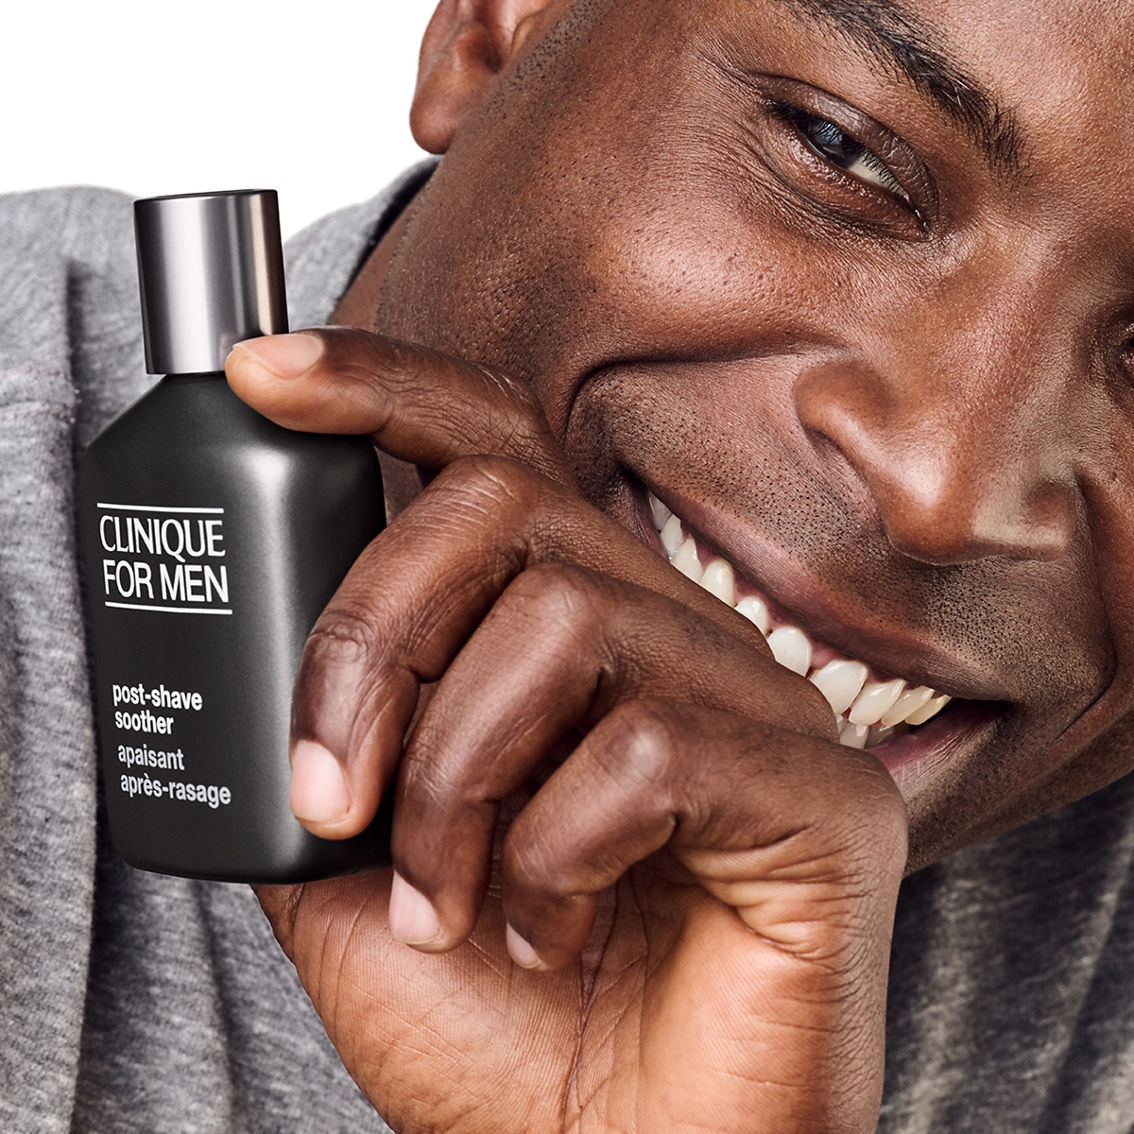 Clinique For Men™ Post Shave Soother 2.5 oz. - Image 4 of 6